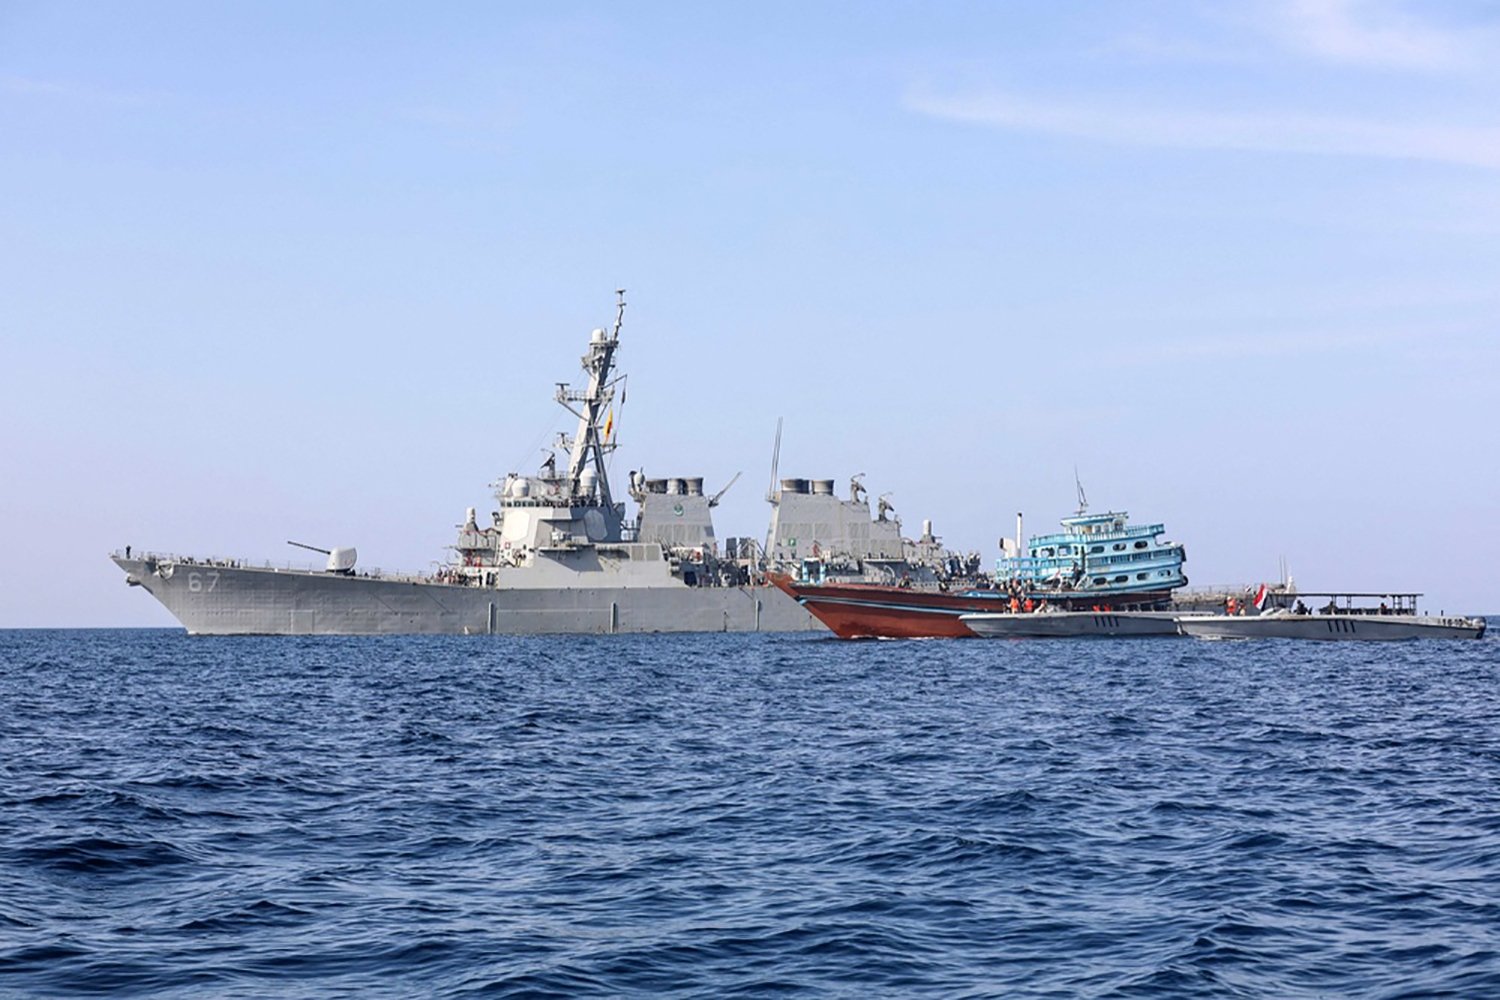 This file photo handout picture released by the U.S. Naval Forces Central Command/U.S. 5th Fleet, on Jan. 21, 2022, shows the guided-missile destroyer USS Cole (DDG 67) transferring control of a stateless fishing vessel to the Yemen Coast Guard in the Gulf of Oman. (AFP Photo)